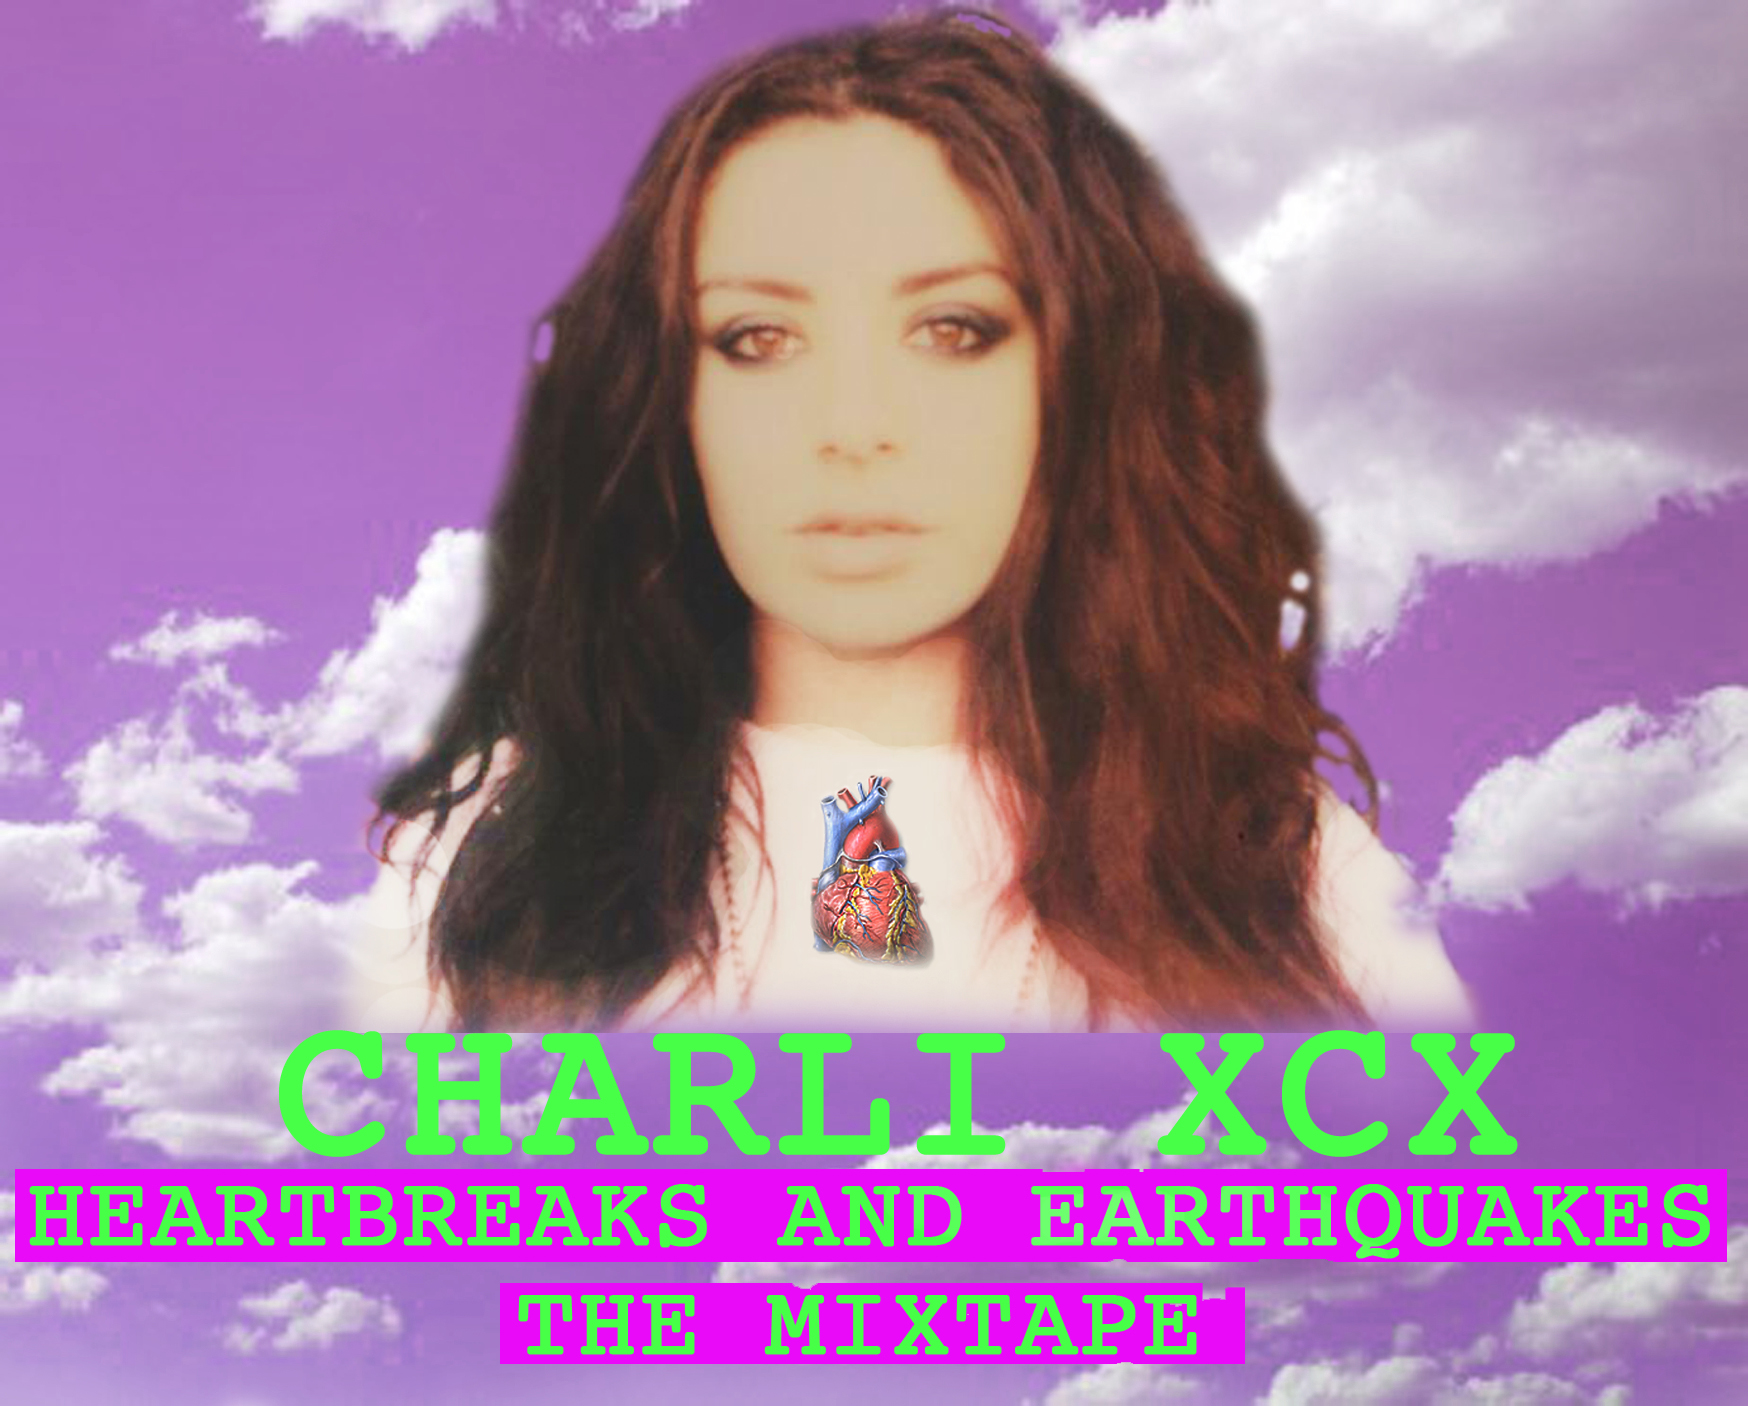 DOWNLOAD THIS NOW: Charli XCX, 'Heartbreaks And Earthquakes.